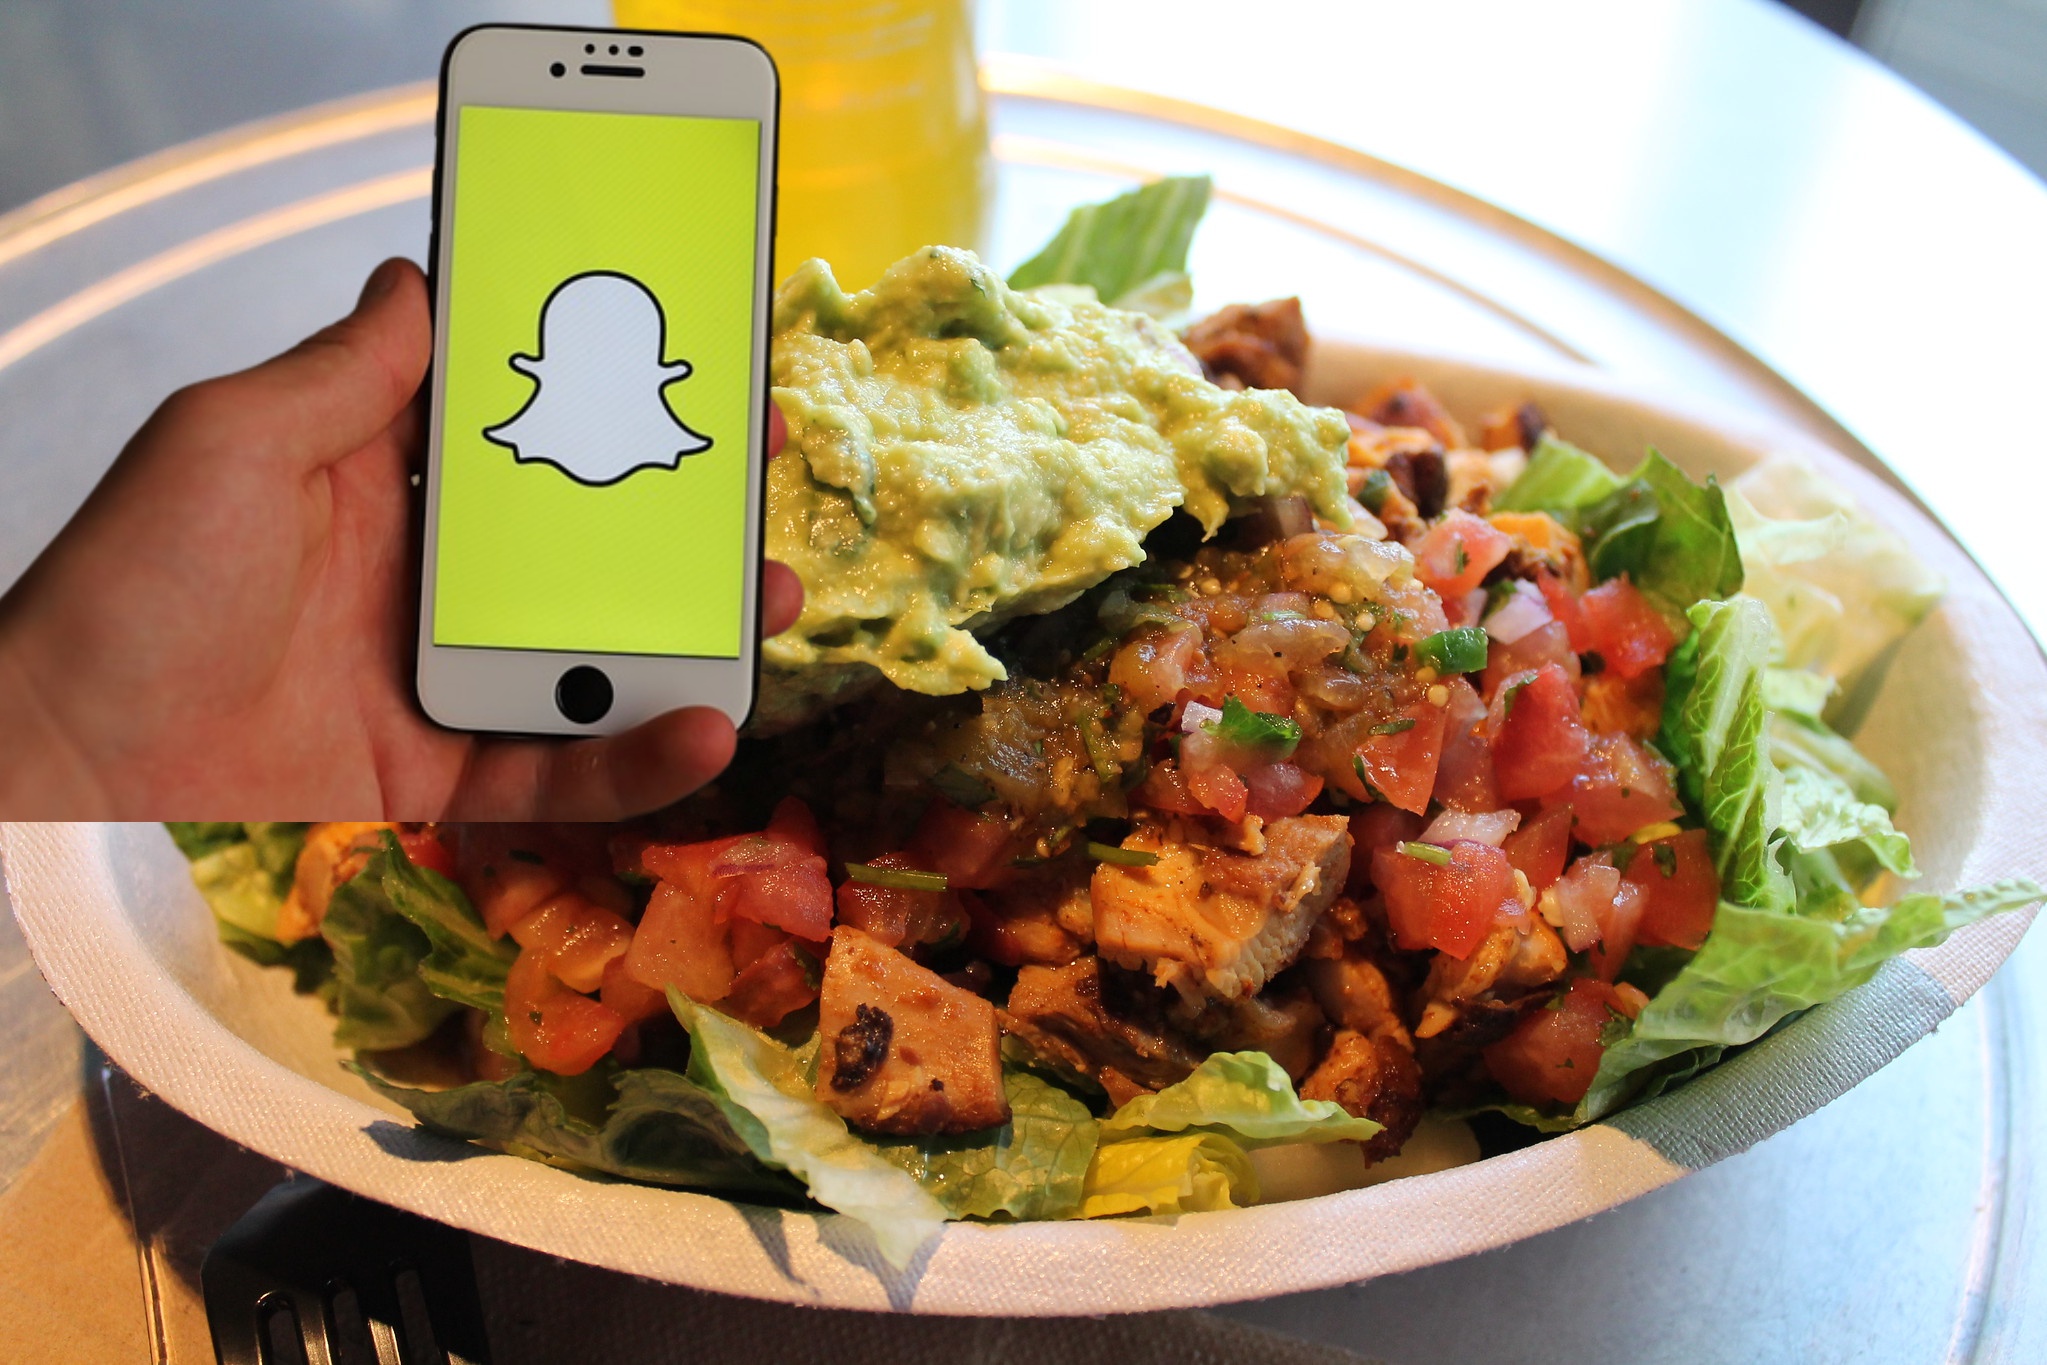 Chipotle brings health and wellness for New Year introducing augmented reality experiences on Snapchat with lifestyle bowls